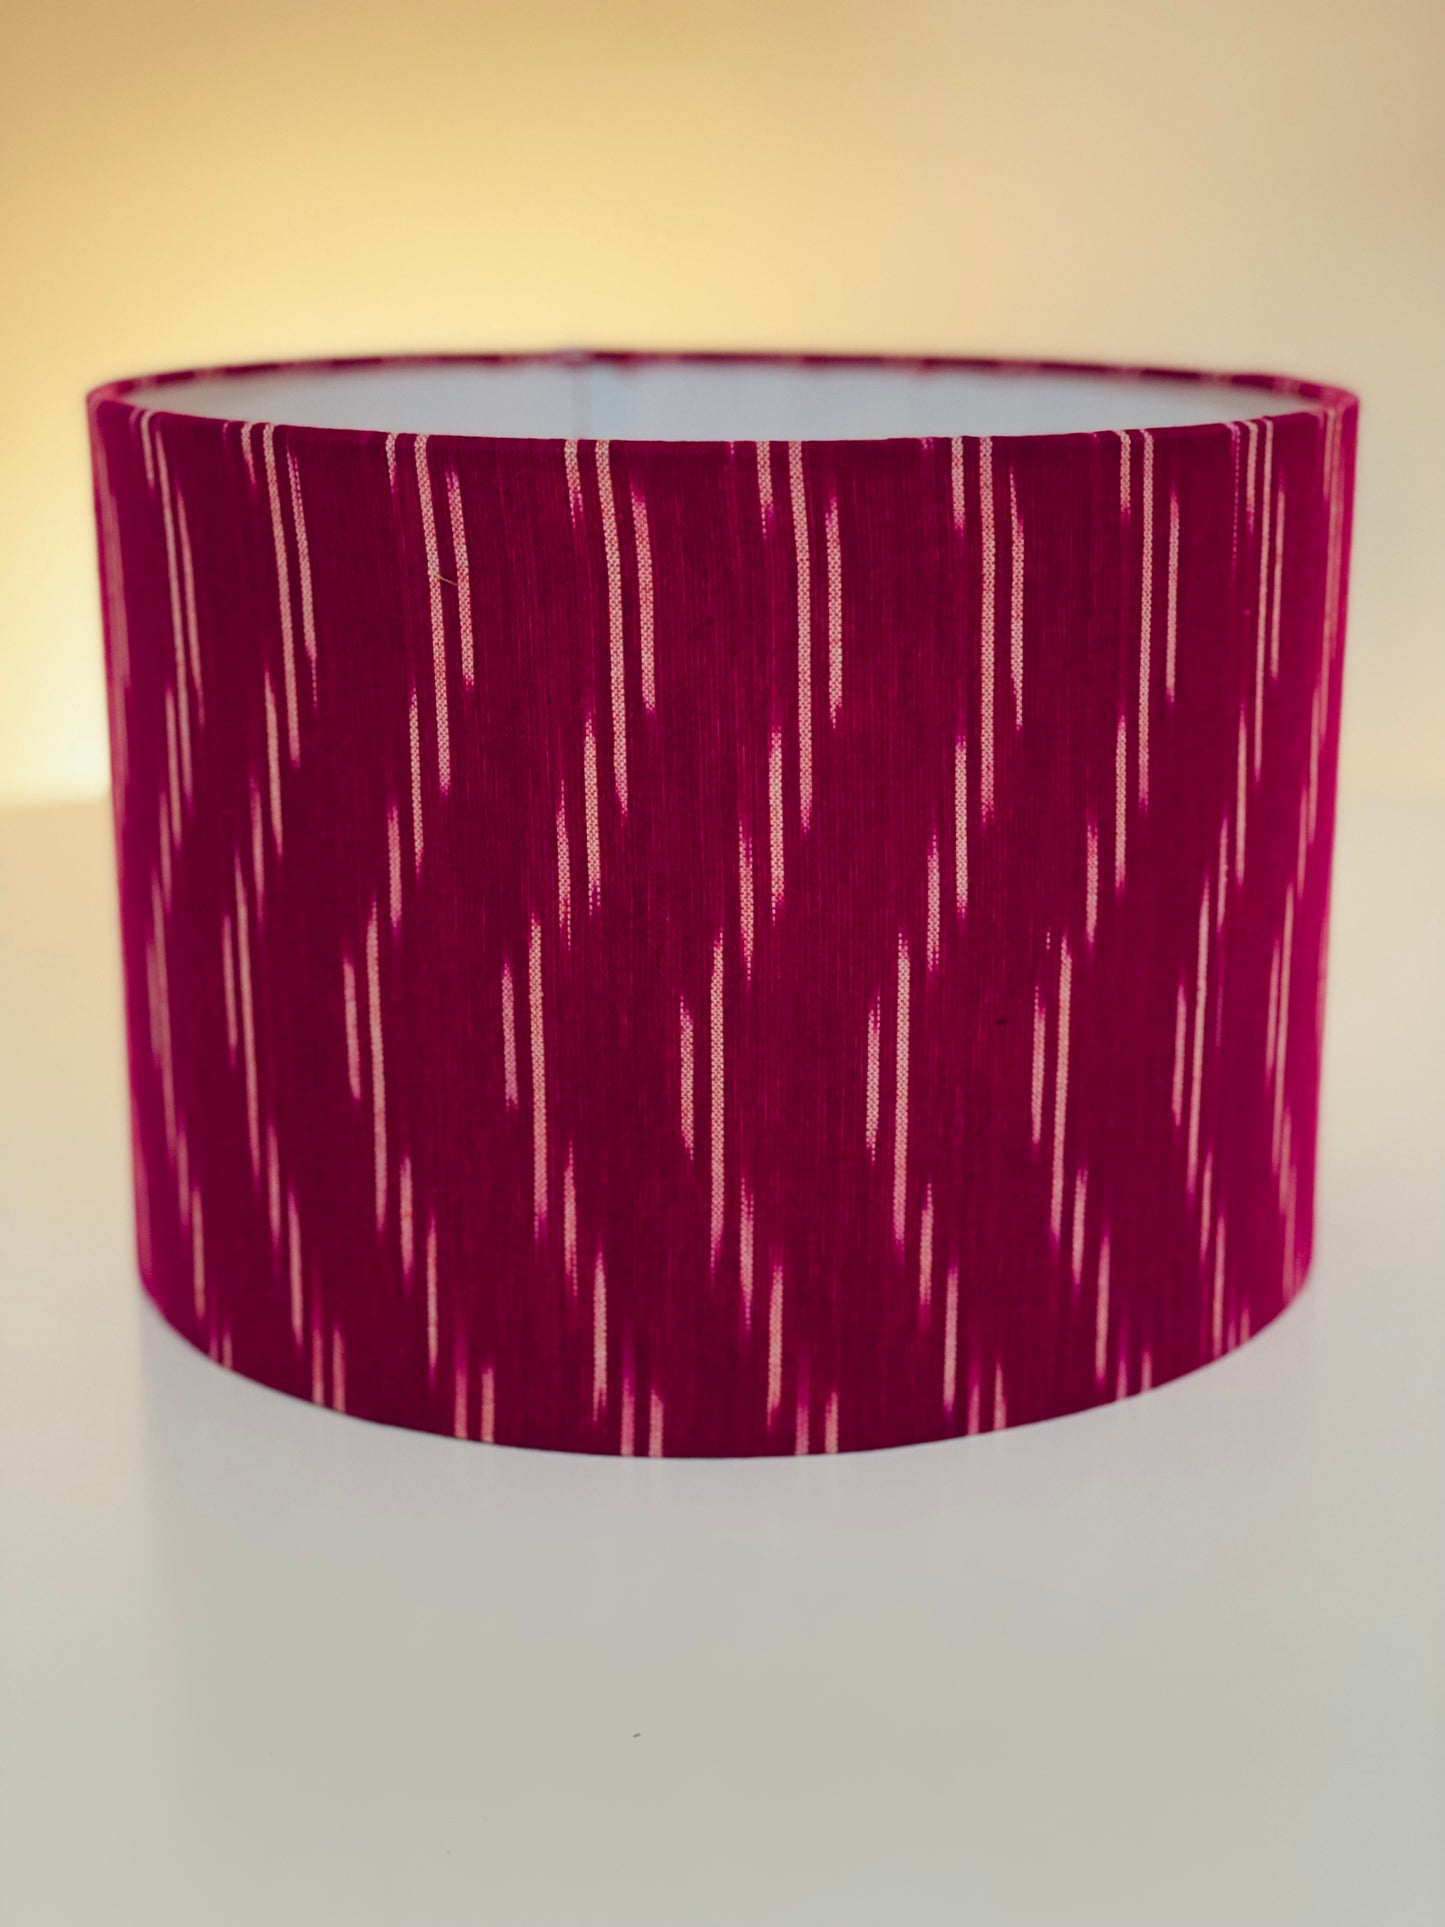 10 inch Drum Lampshade. Indian Pochampally Ikat Weave Cotton Fabric. Plum and Ivory.